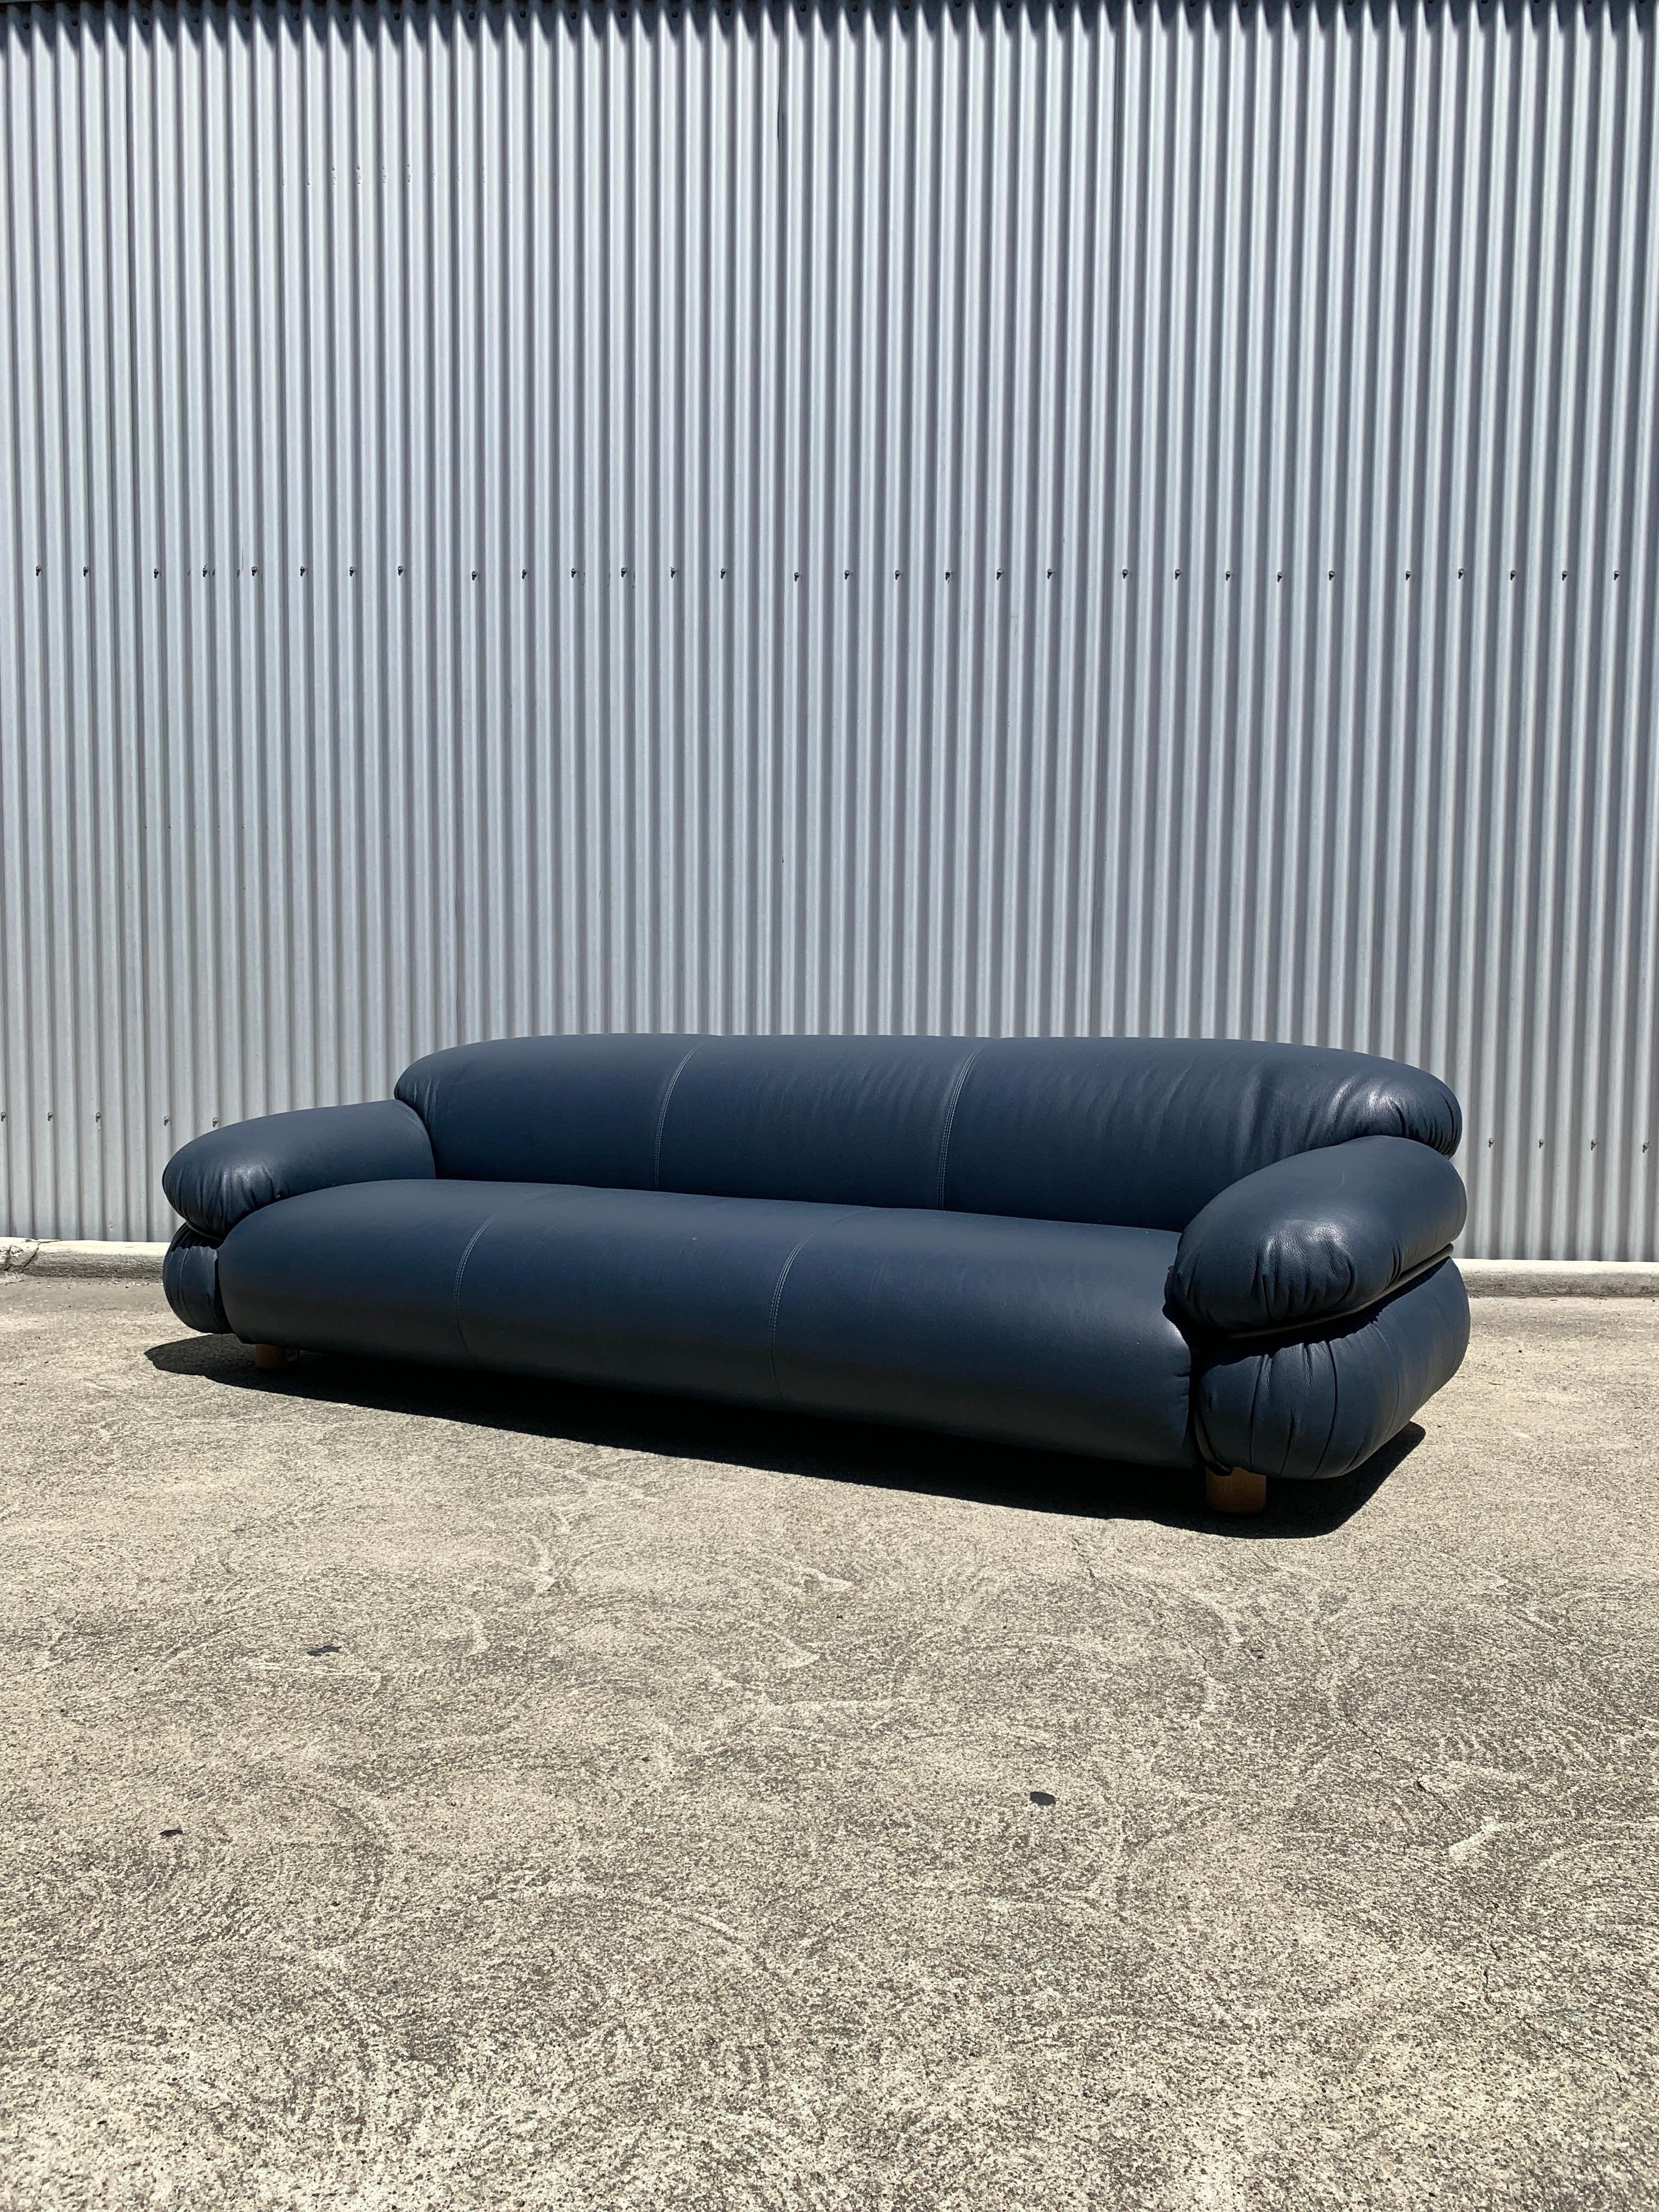 Design ca 1970. Glove soft full grain leather. Full size sofa version from post 2015 reissue. Authentic production labeled Tacchini, Italy.